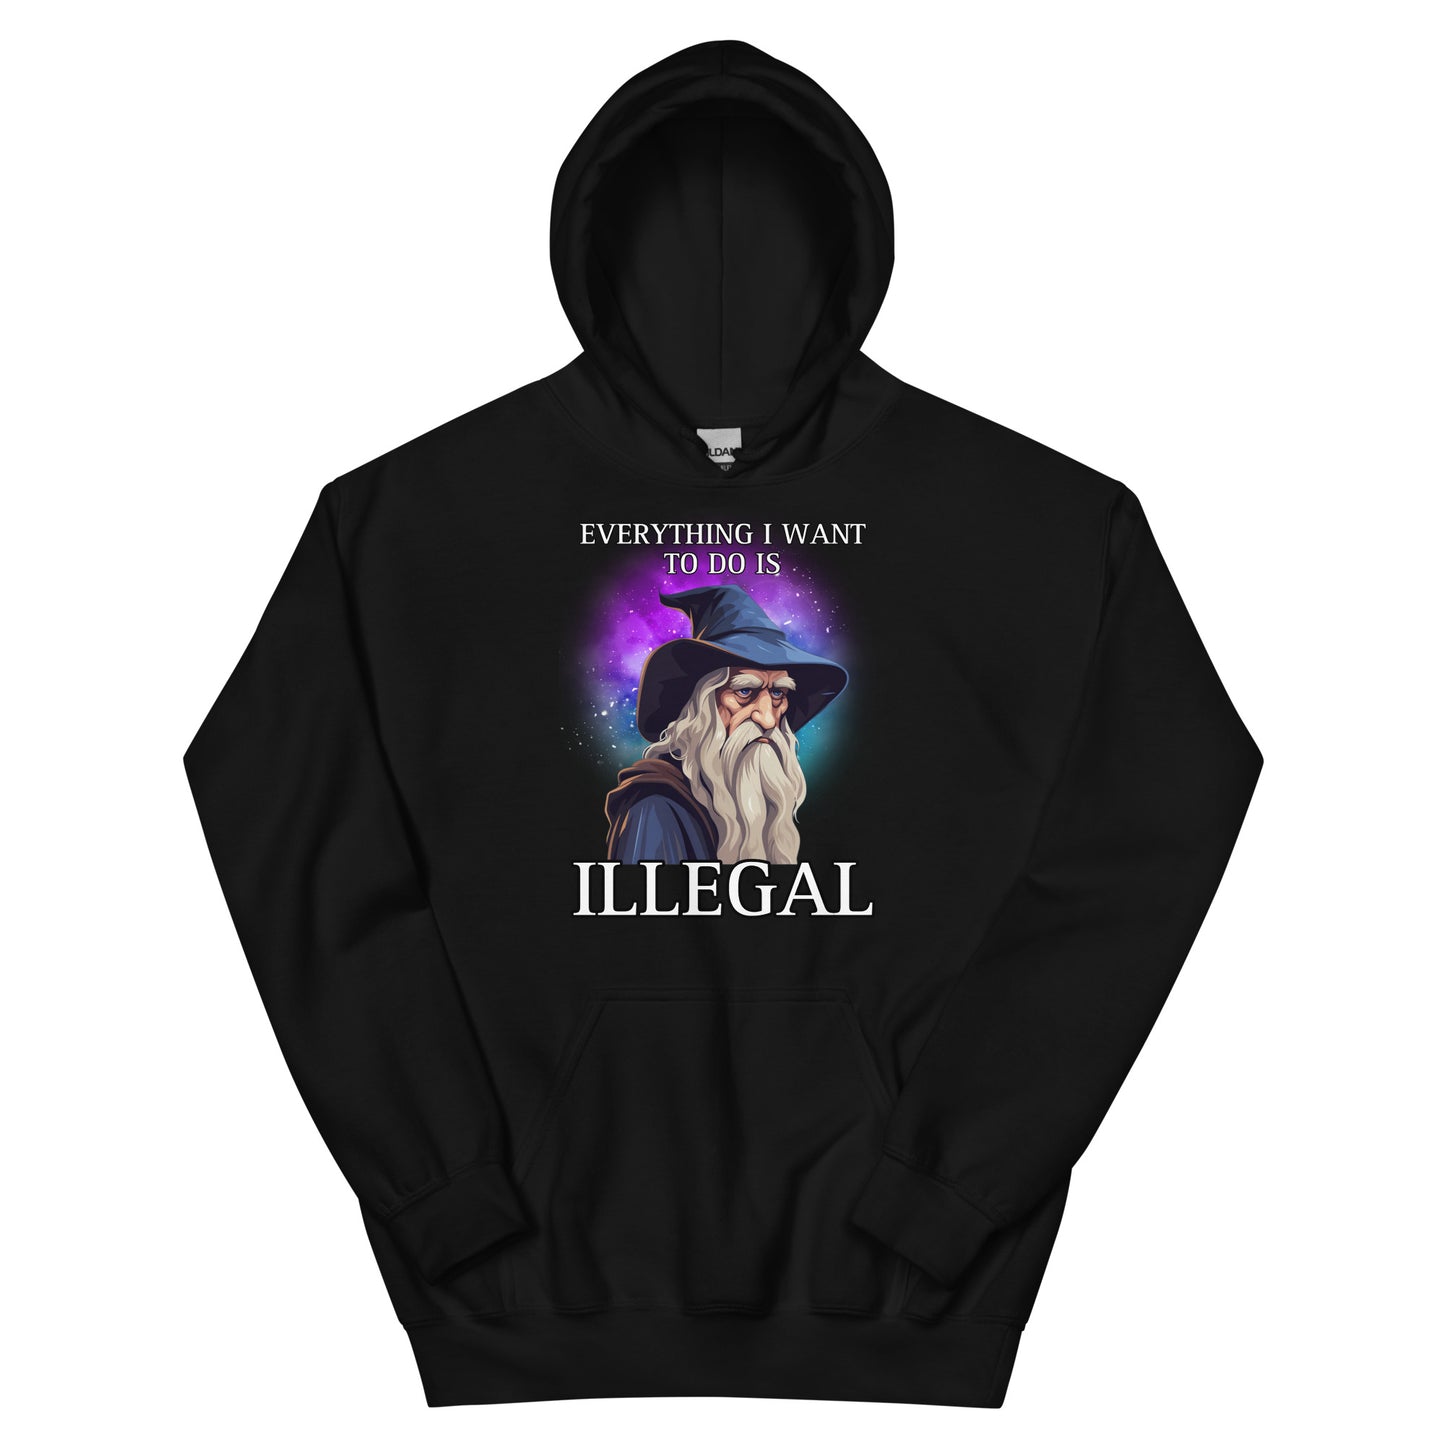 Everything I want to do is illegal (hoodie)